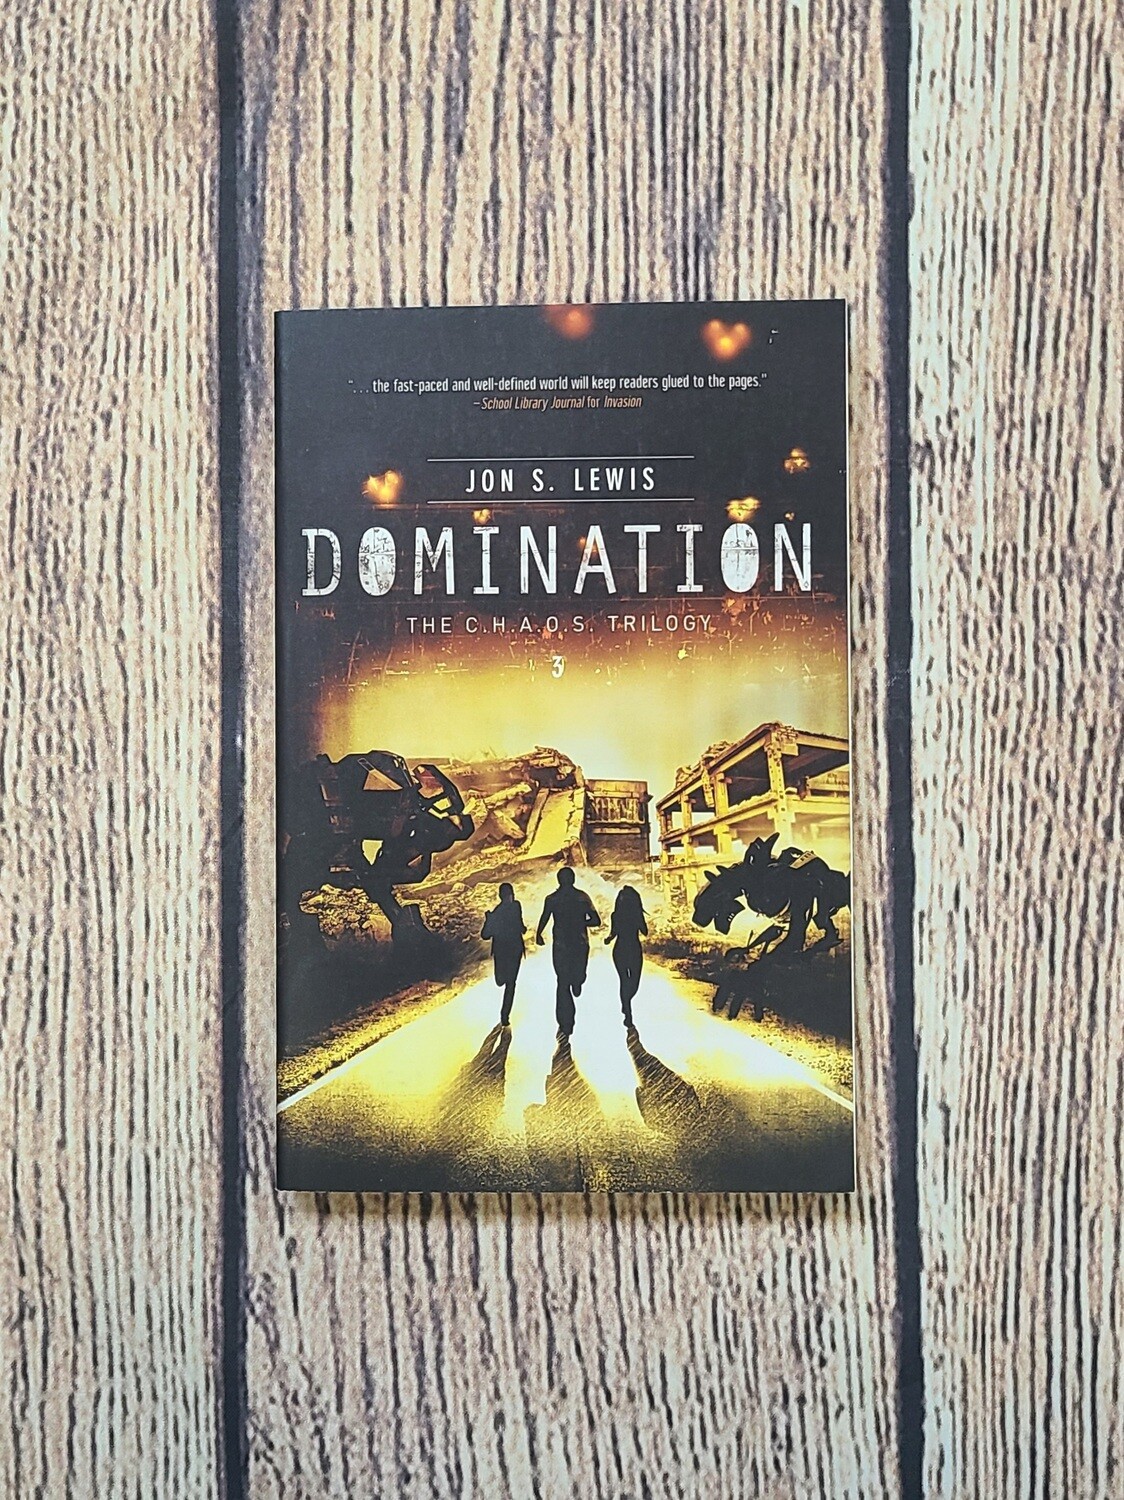 Domination by Jon S. Lewis